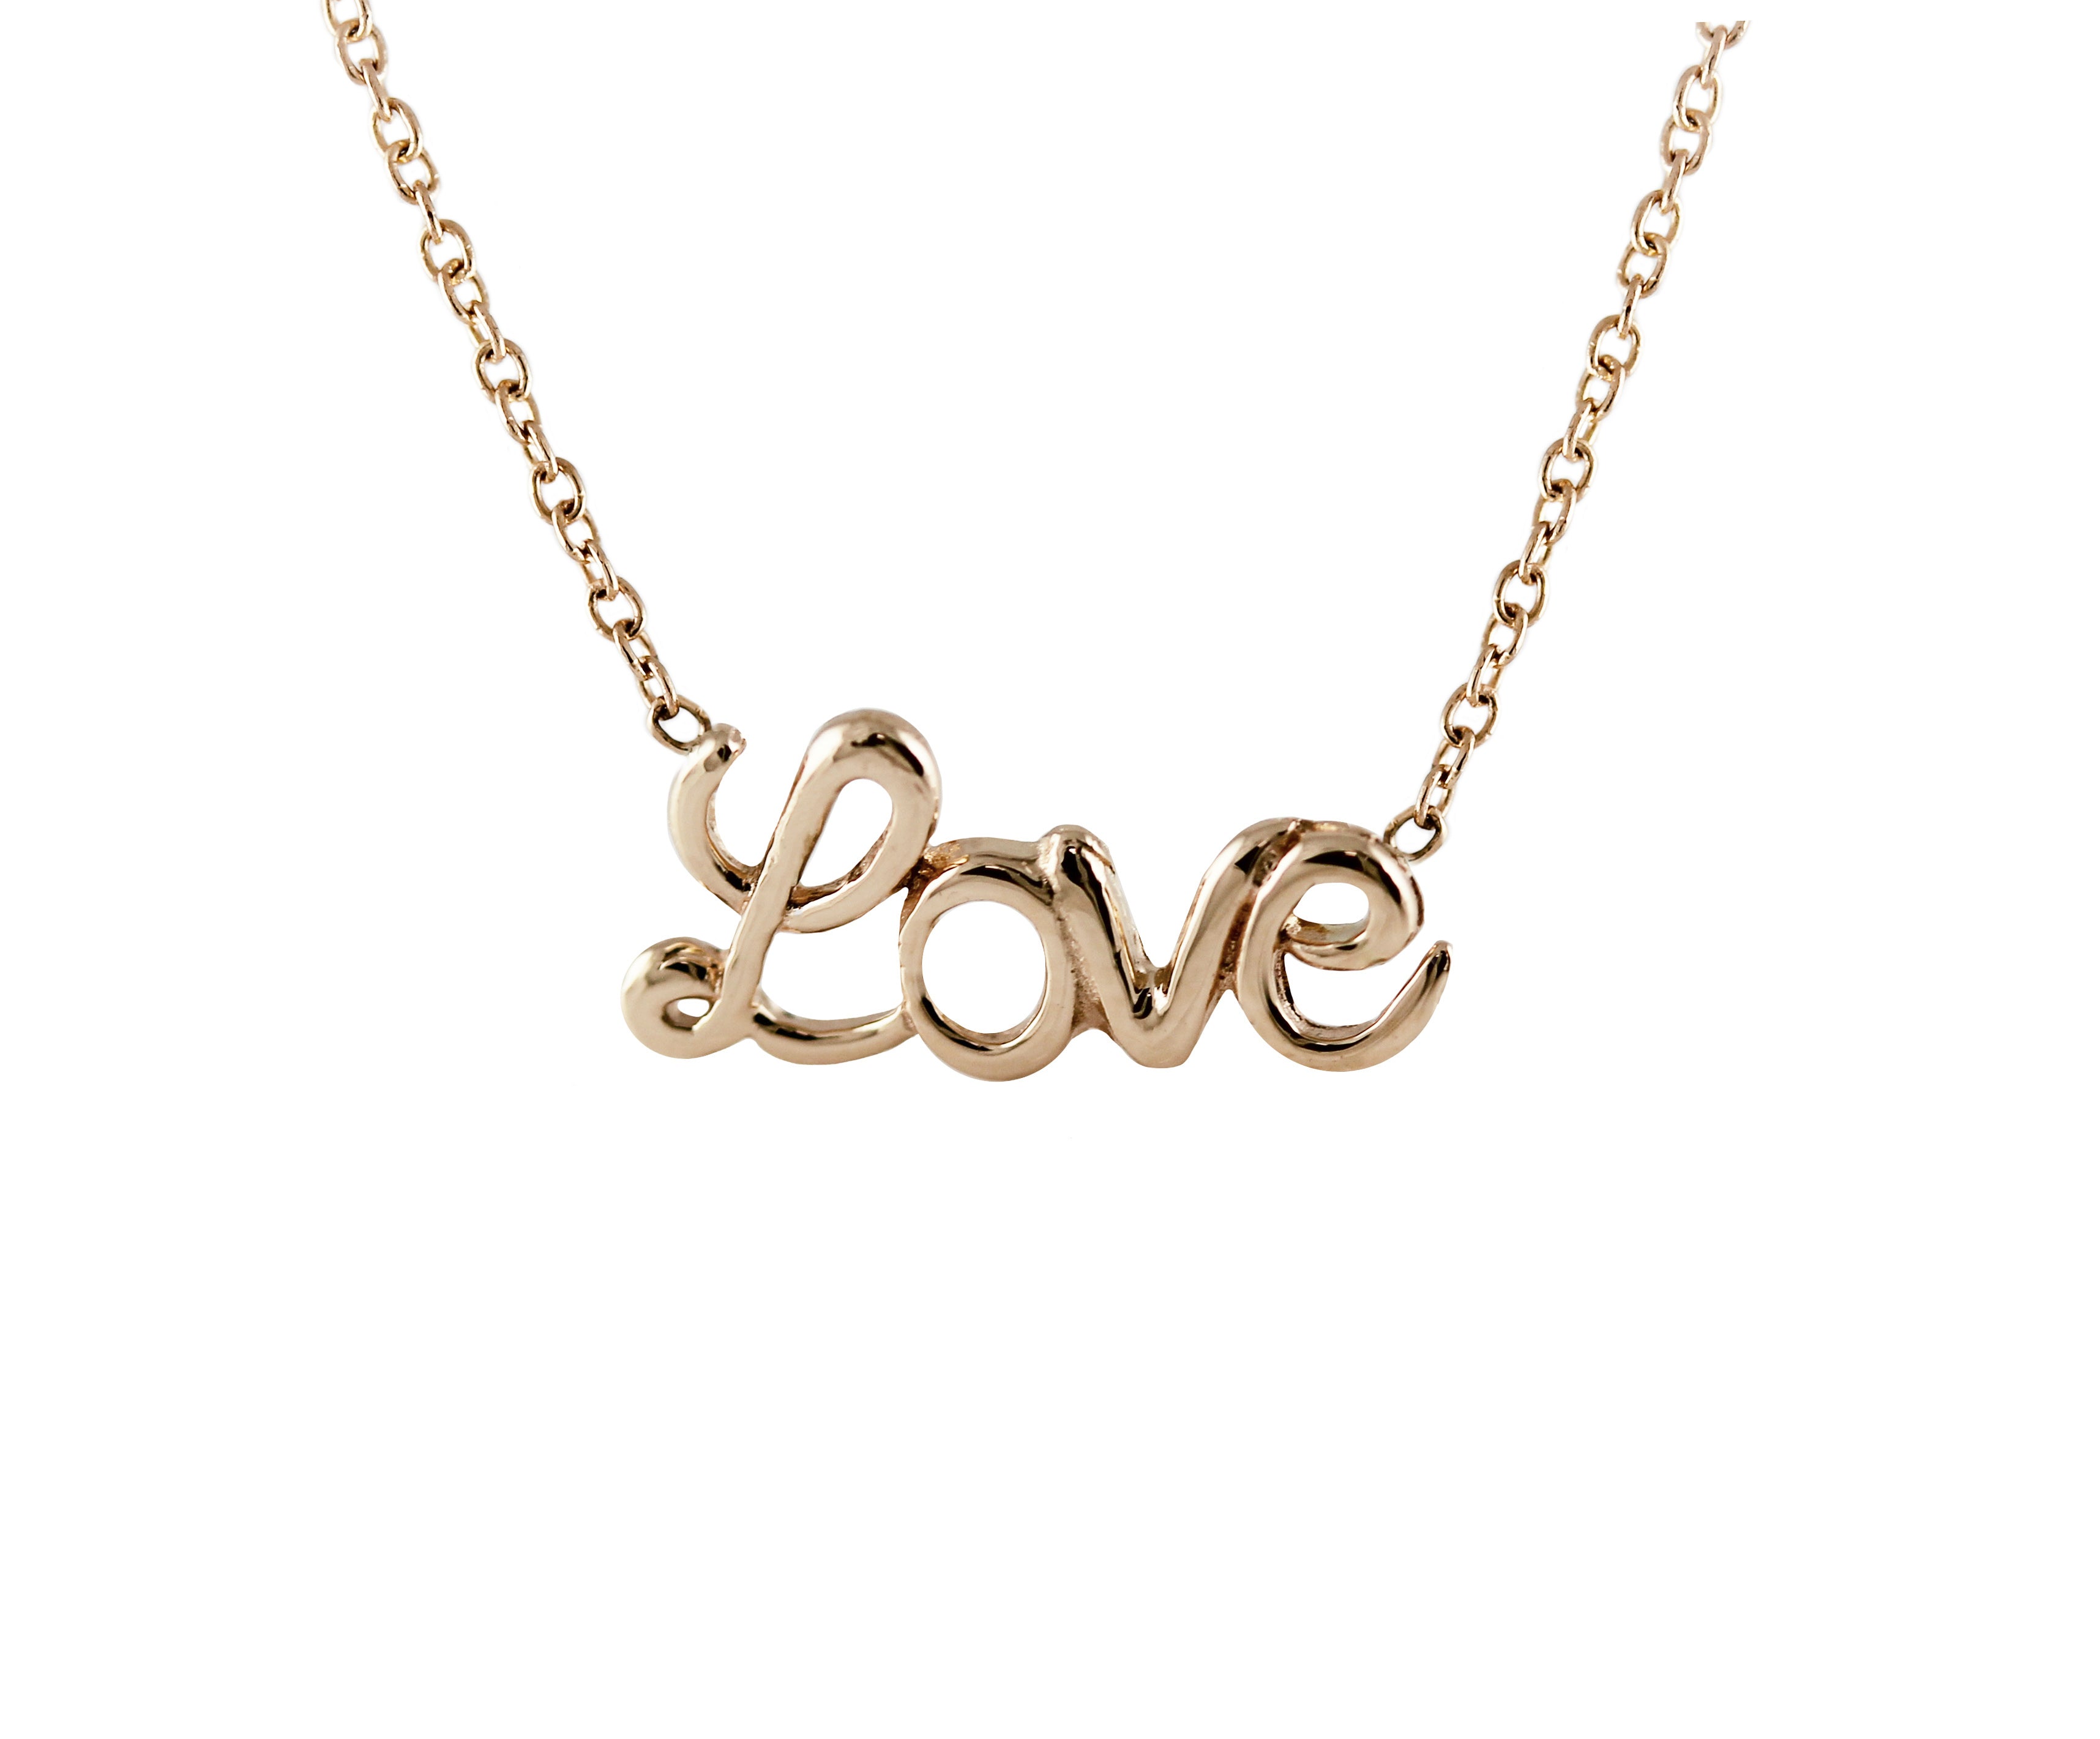 Amazon.com: apop nyc Rose Goldtone Sterling Silver Love Necklace 16 inch -  17 inch [Jewelry] : apop nyc: Clothing, Shoes & Jewelry